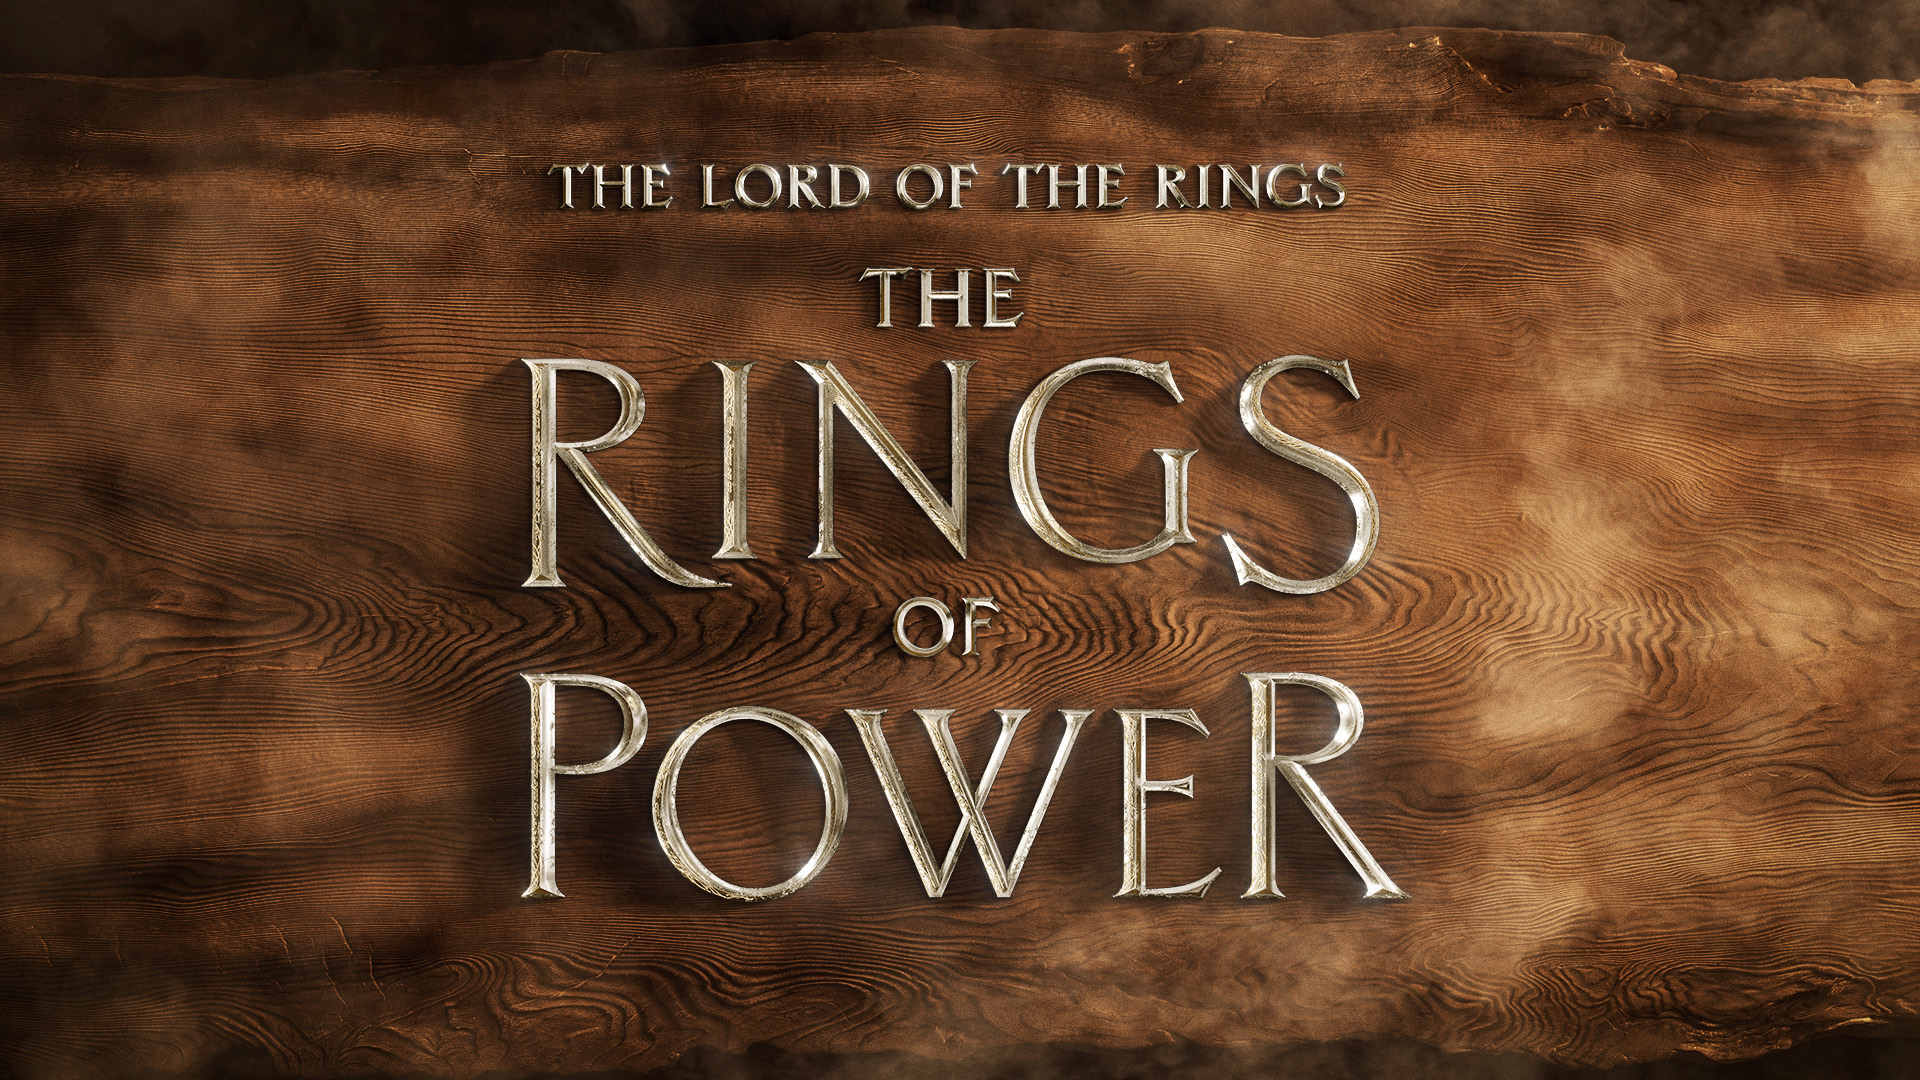 The "Rings of Power" trailer garnered 257 million views in the first 24 goals